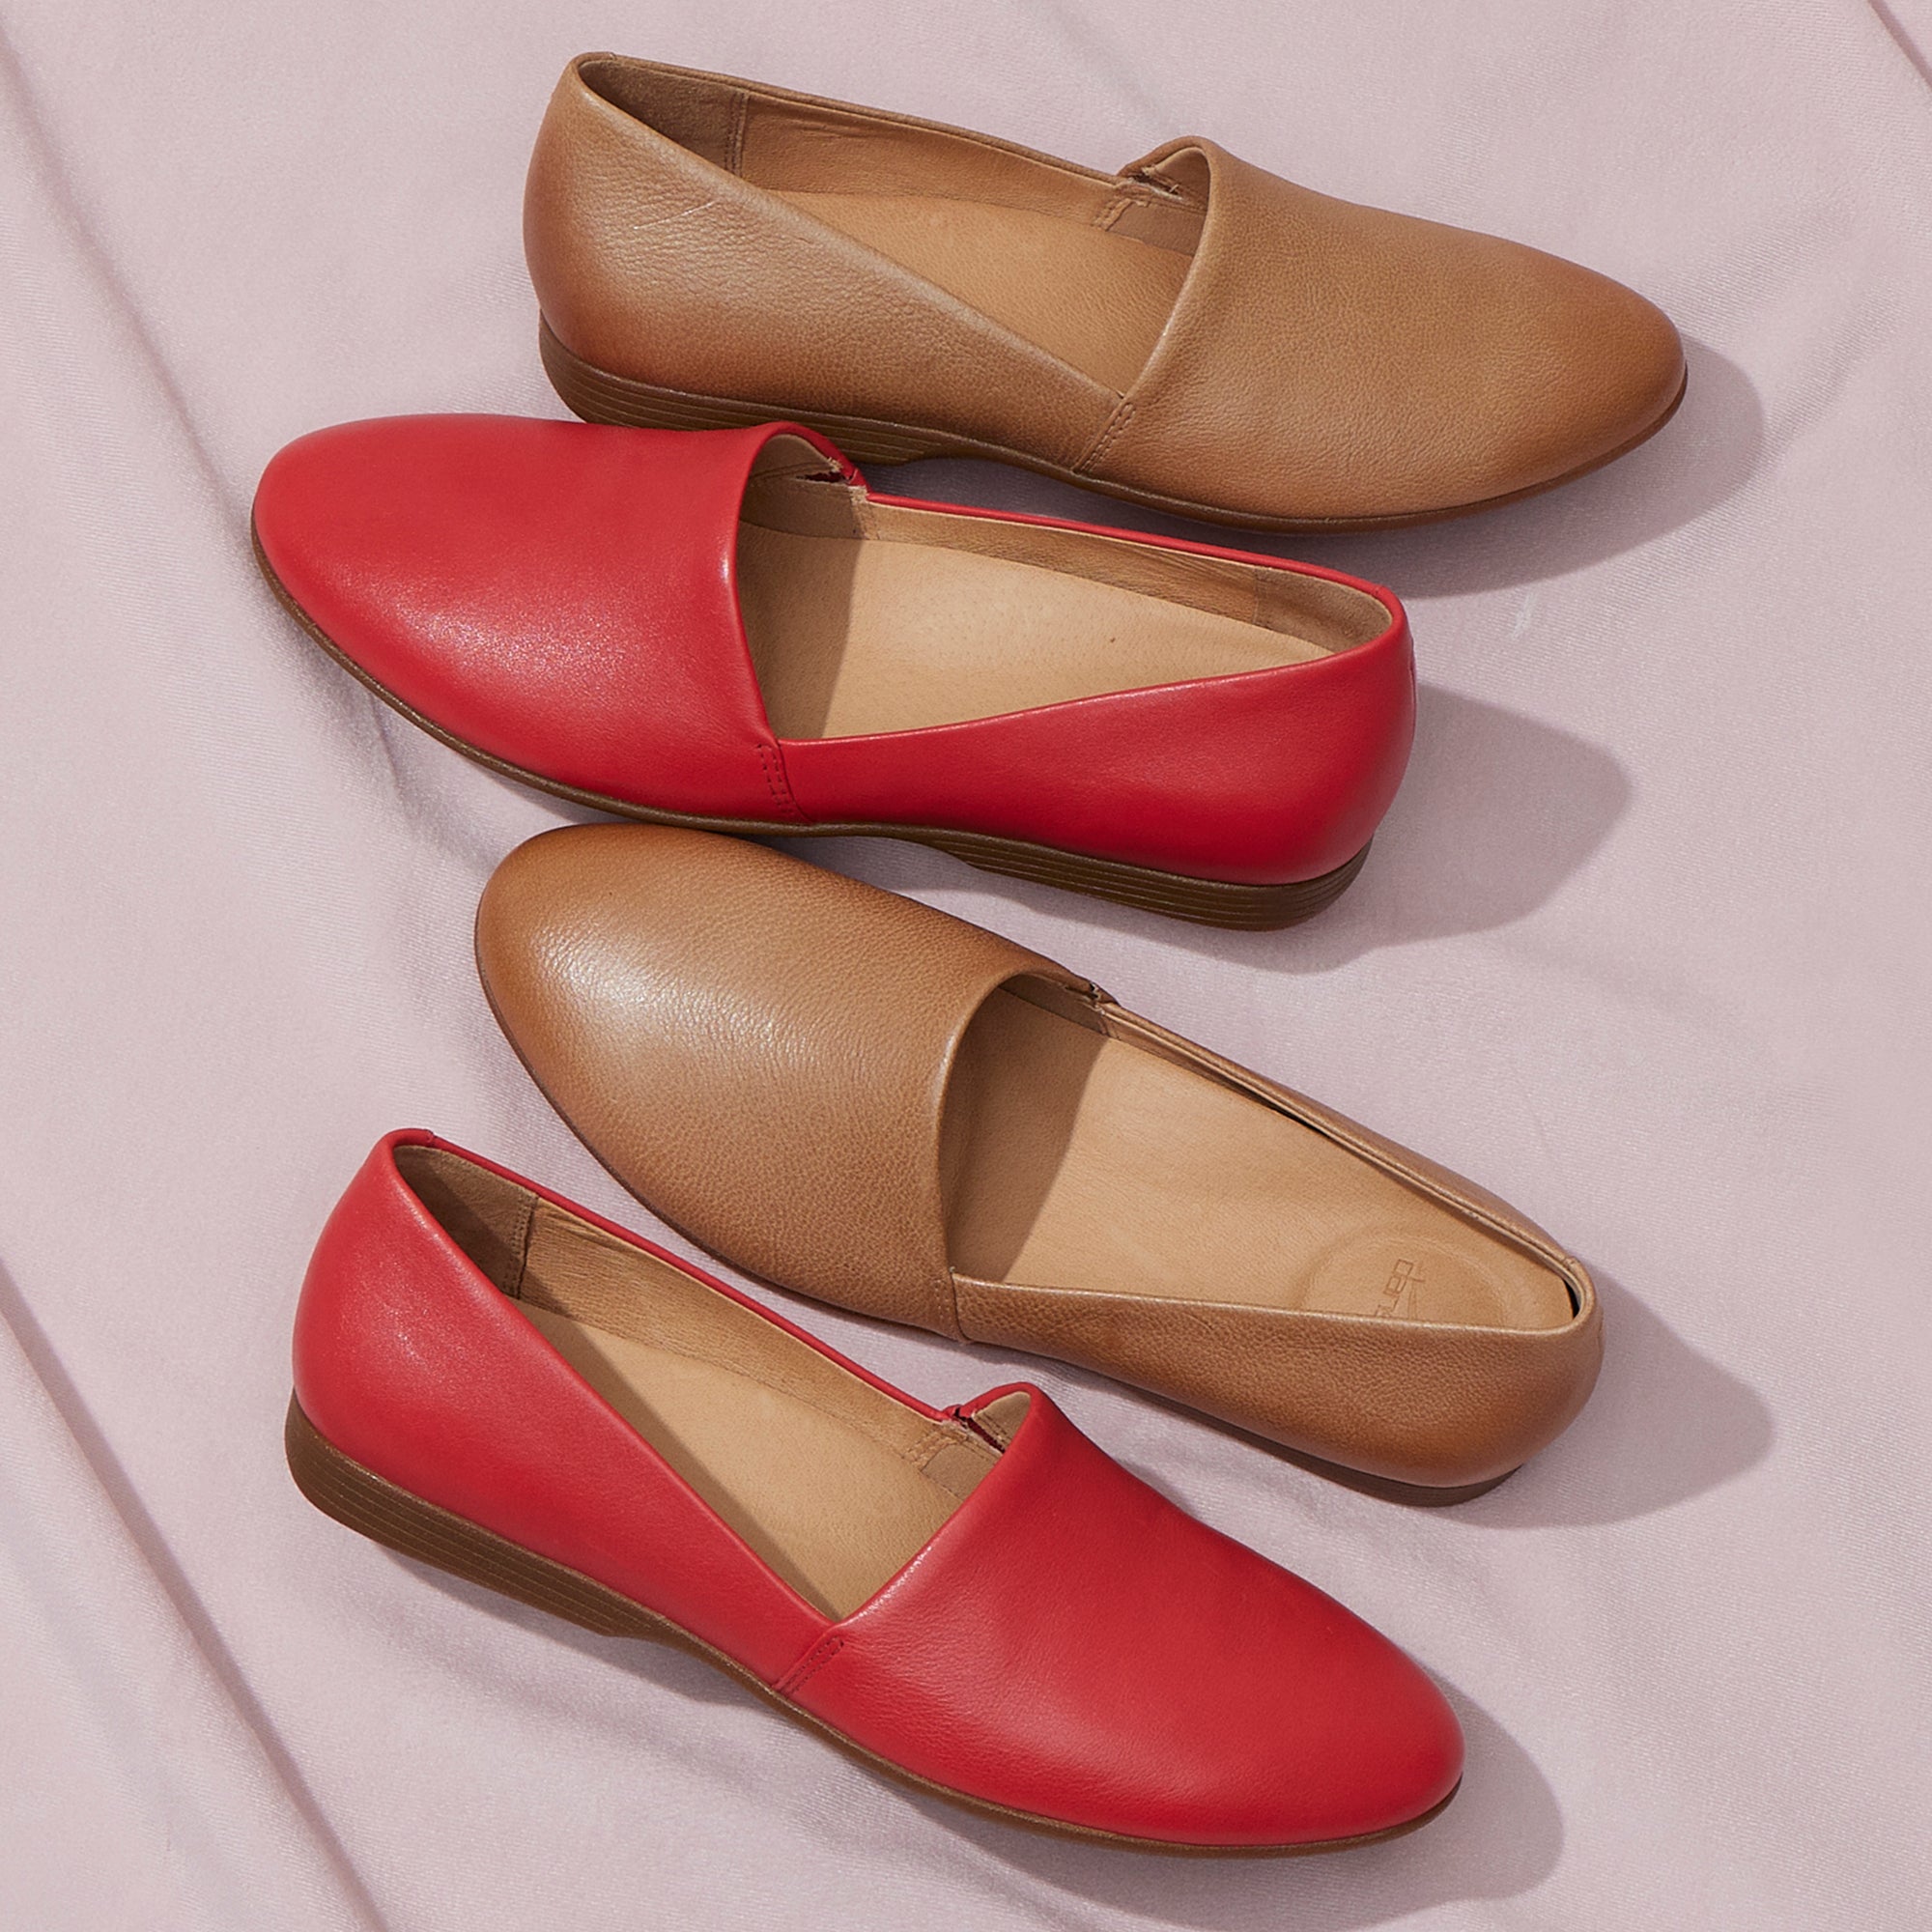 Red and tan flats.